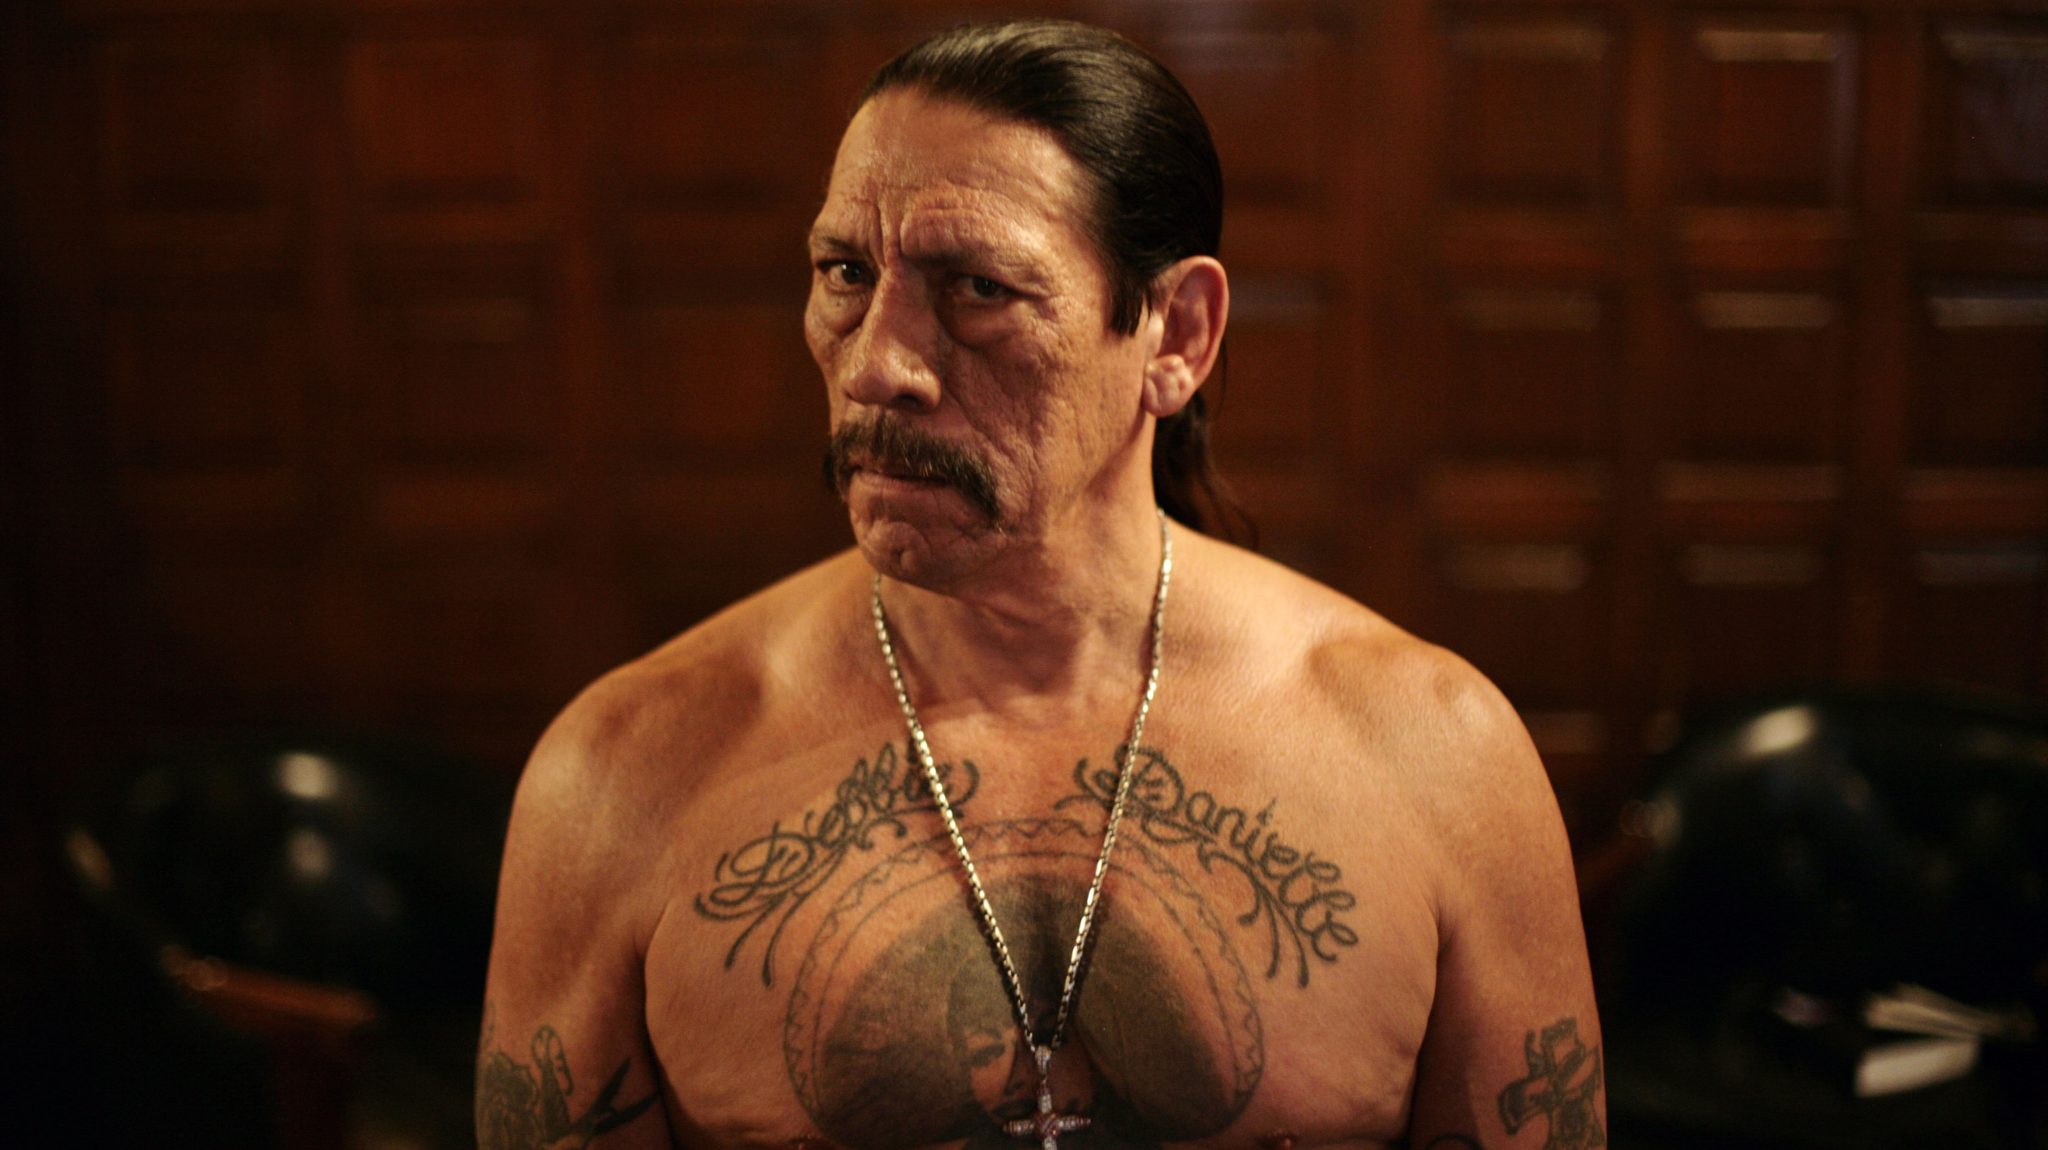 13. Danny Trejo once pulled over by an accident site where two cars had col...